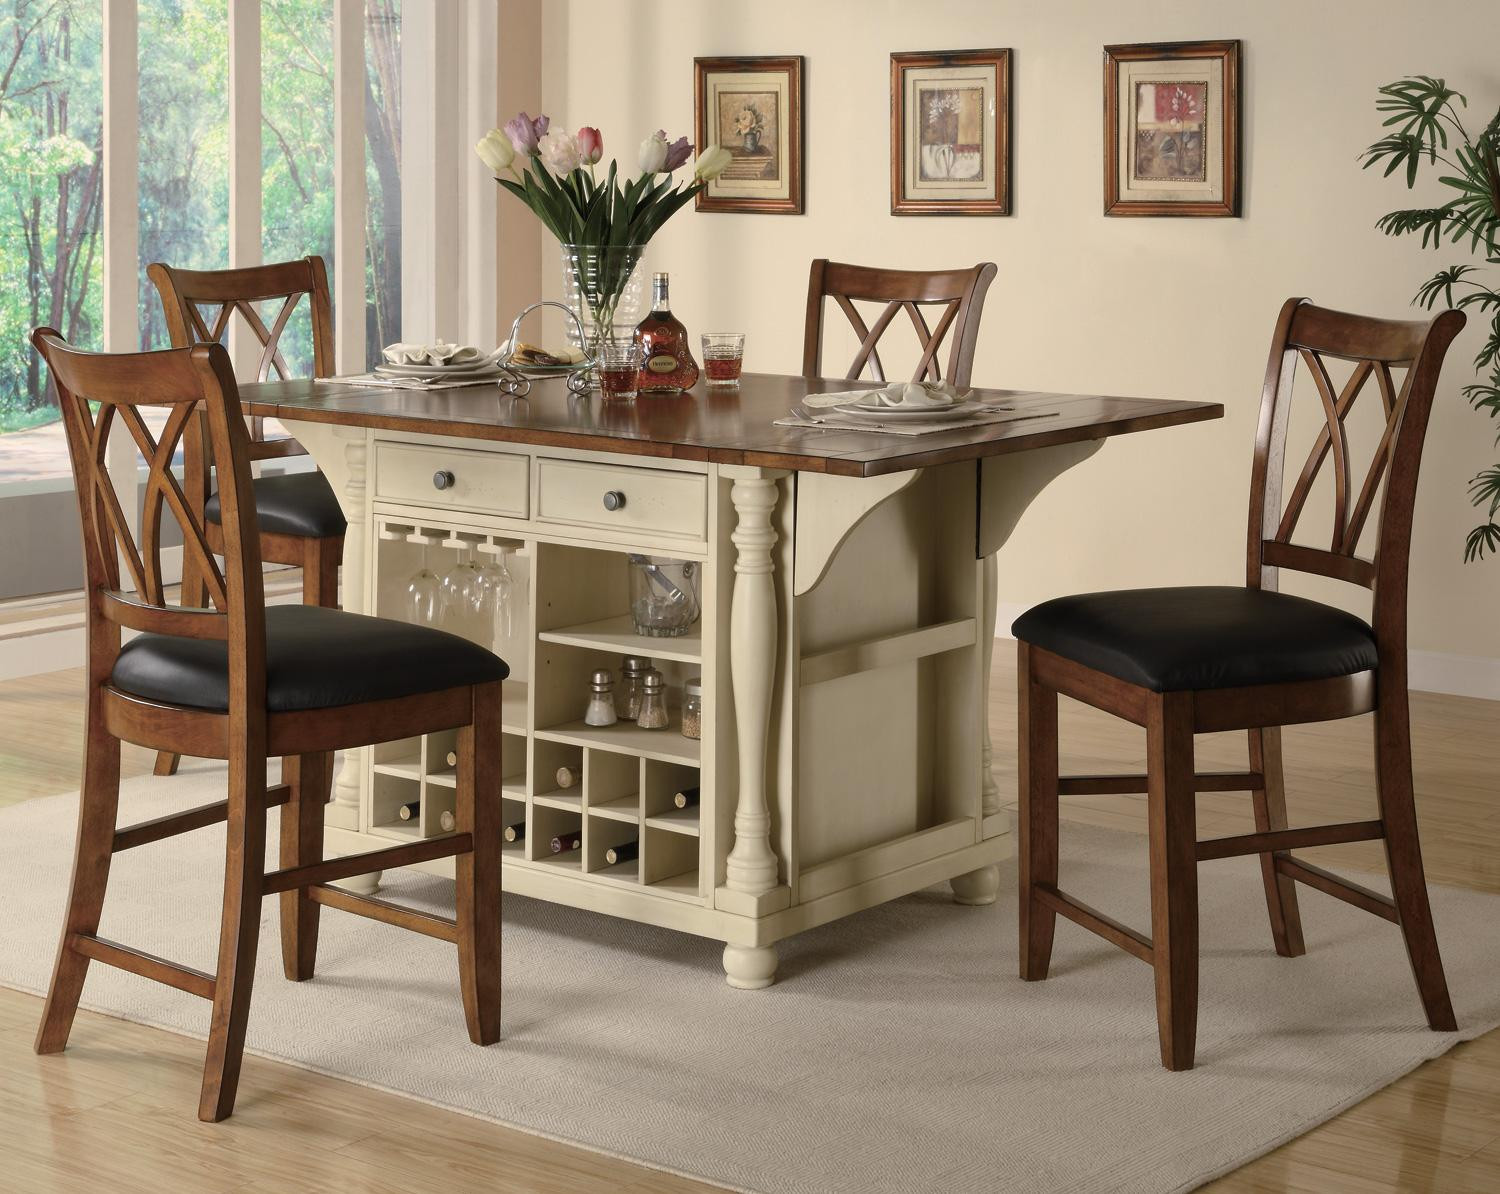 Counter Height Small Kitchen Table
 Counter Height Kitchen Tables for Special Dining Room